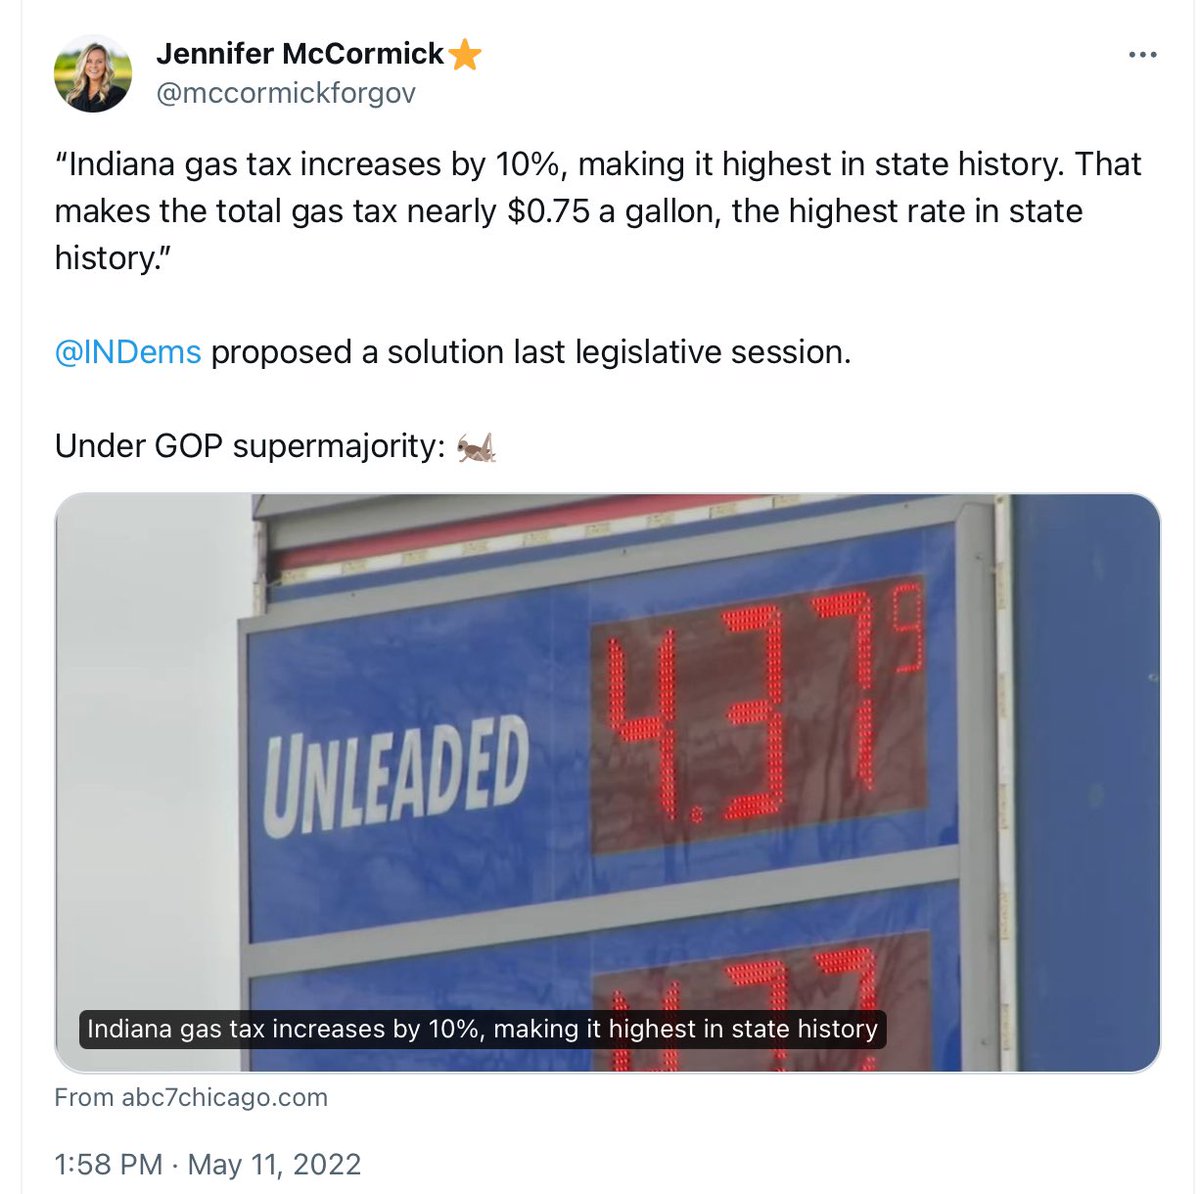 @TheWilsonsIN @mccormickforgov @MomsDemand In just a quick Google search I was able to find tweets regarding the gas tax. I’ve also seen tweets regarding environmental issues, education, safety, & women’s rights. If you’re paying attention that points to more than 1 or 2 issues. Stop with the parroting of talking points.